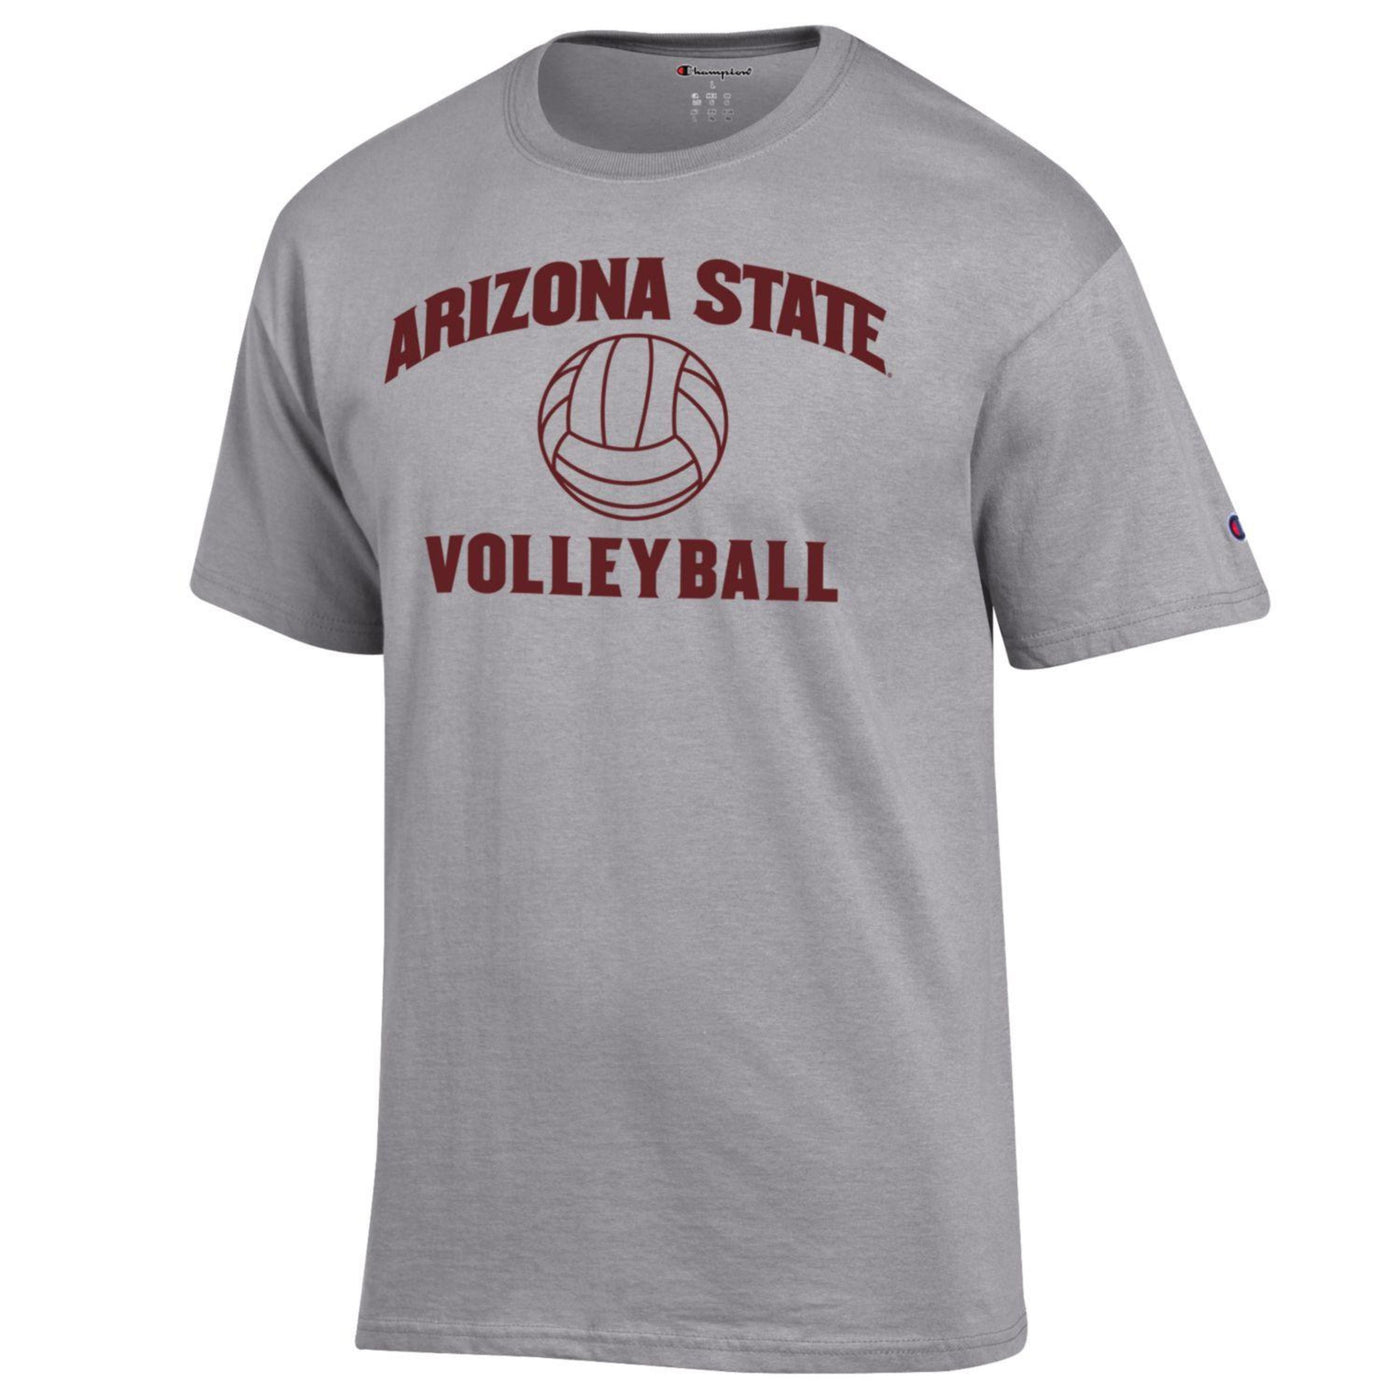 ASU gray Champion tee with 'Arizona State Volleyball' lettering surrounding a volleyball